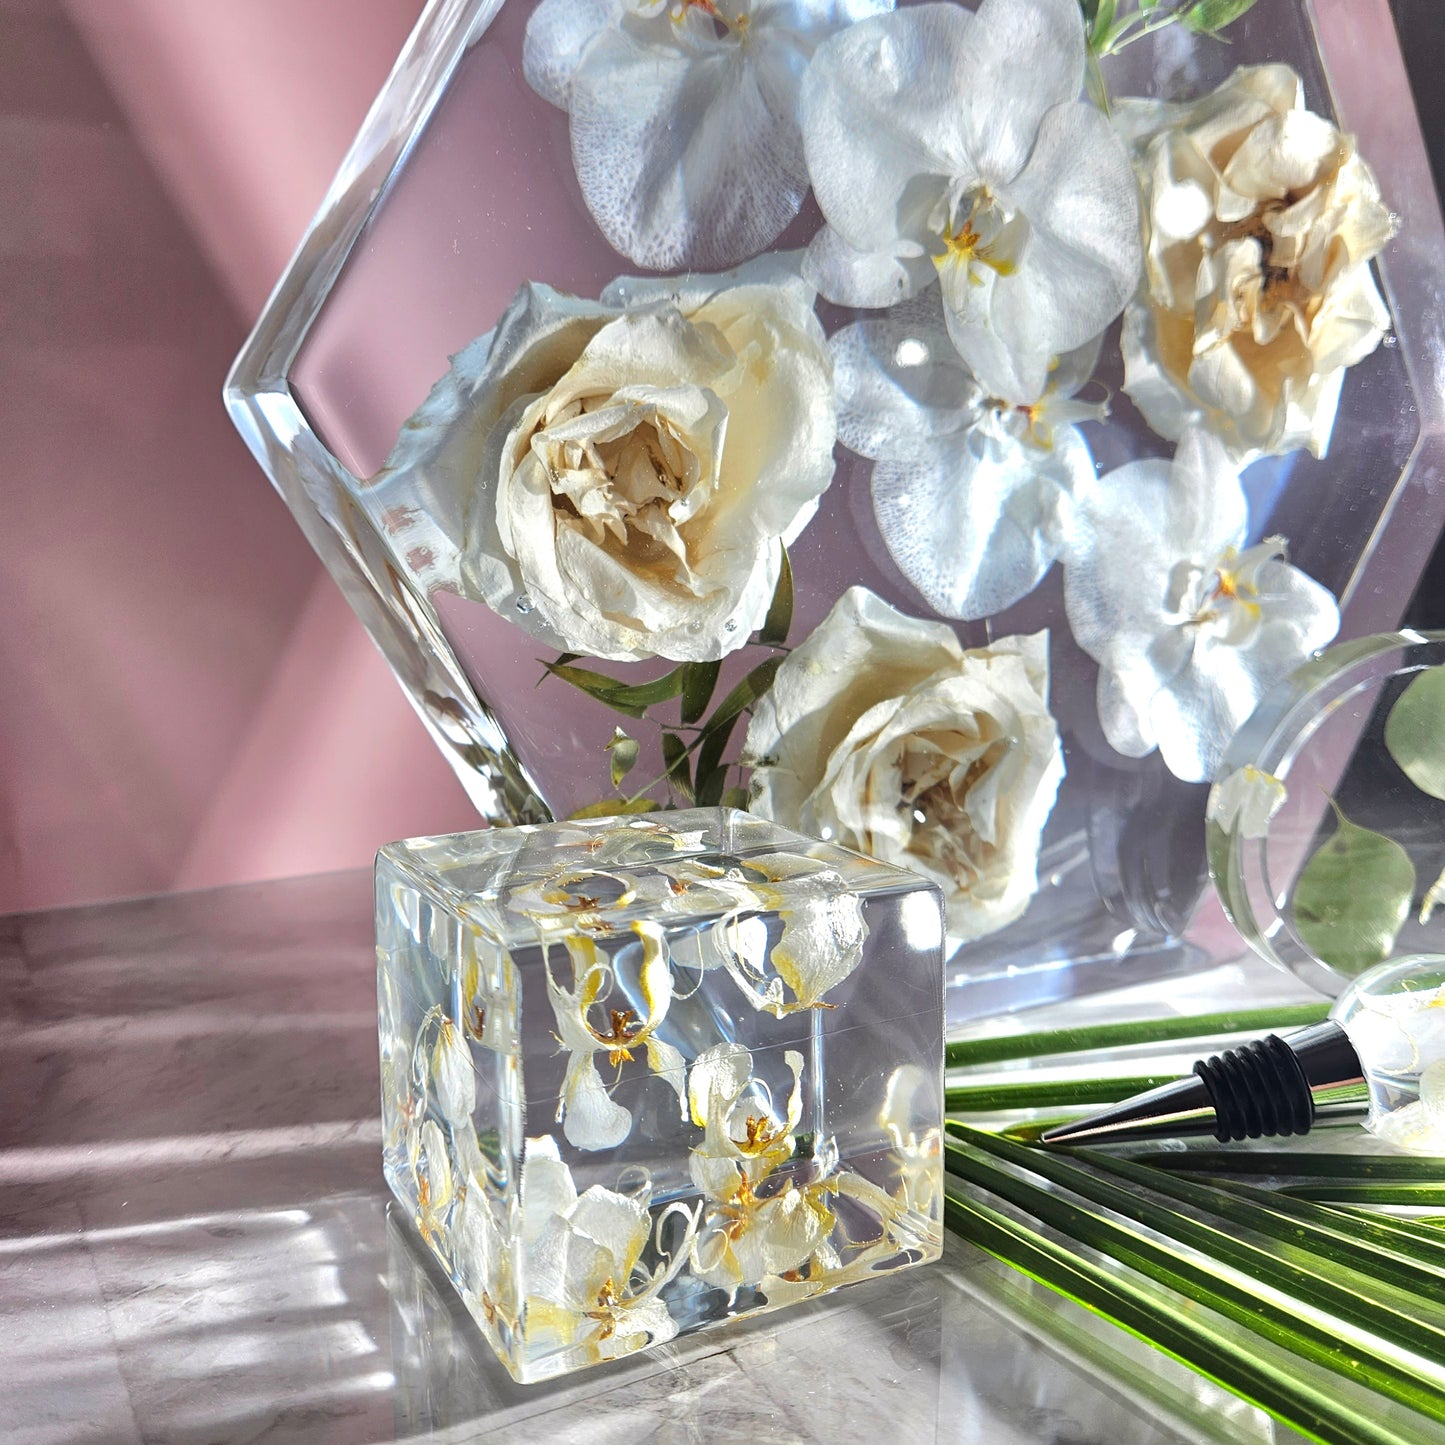 Large Orchid 12" Hexagon 3D Resin Wedding Bouquet Preservation Floral Gift Keepsake Save Your Wedding Flowers Forever